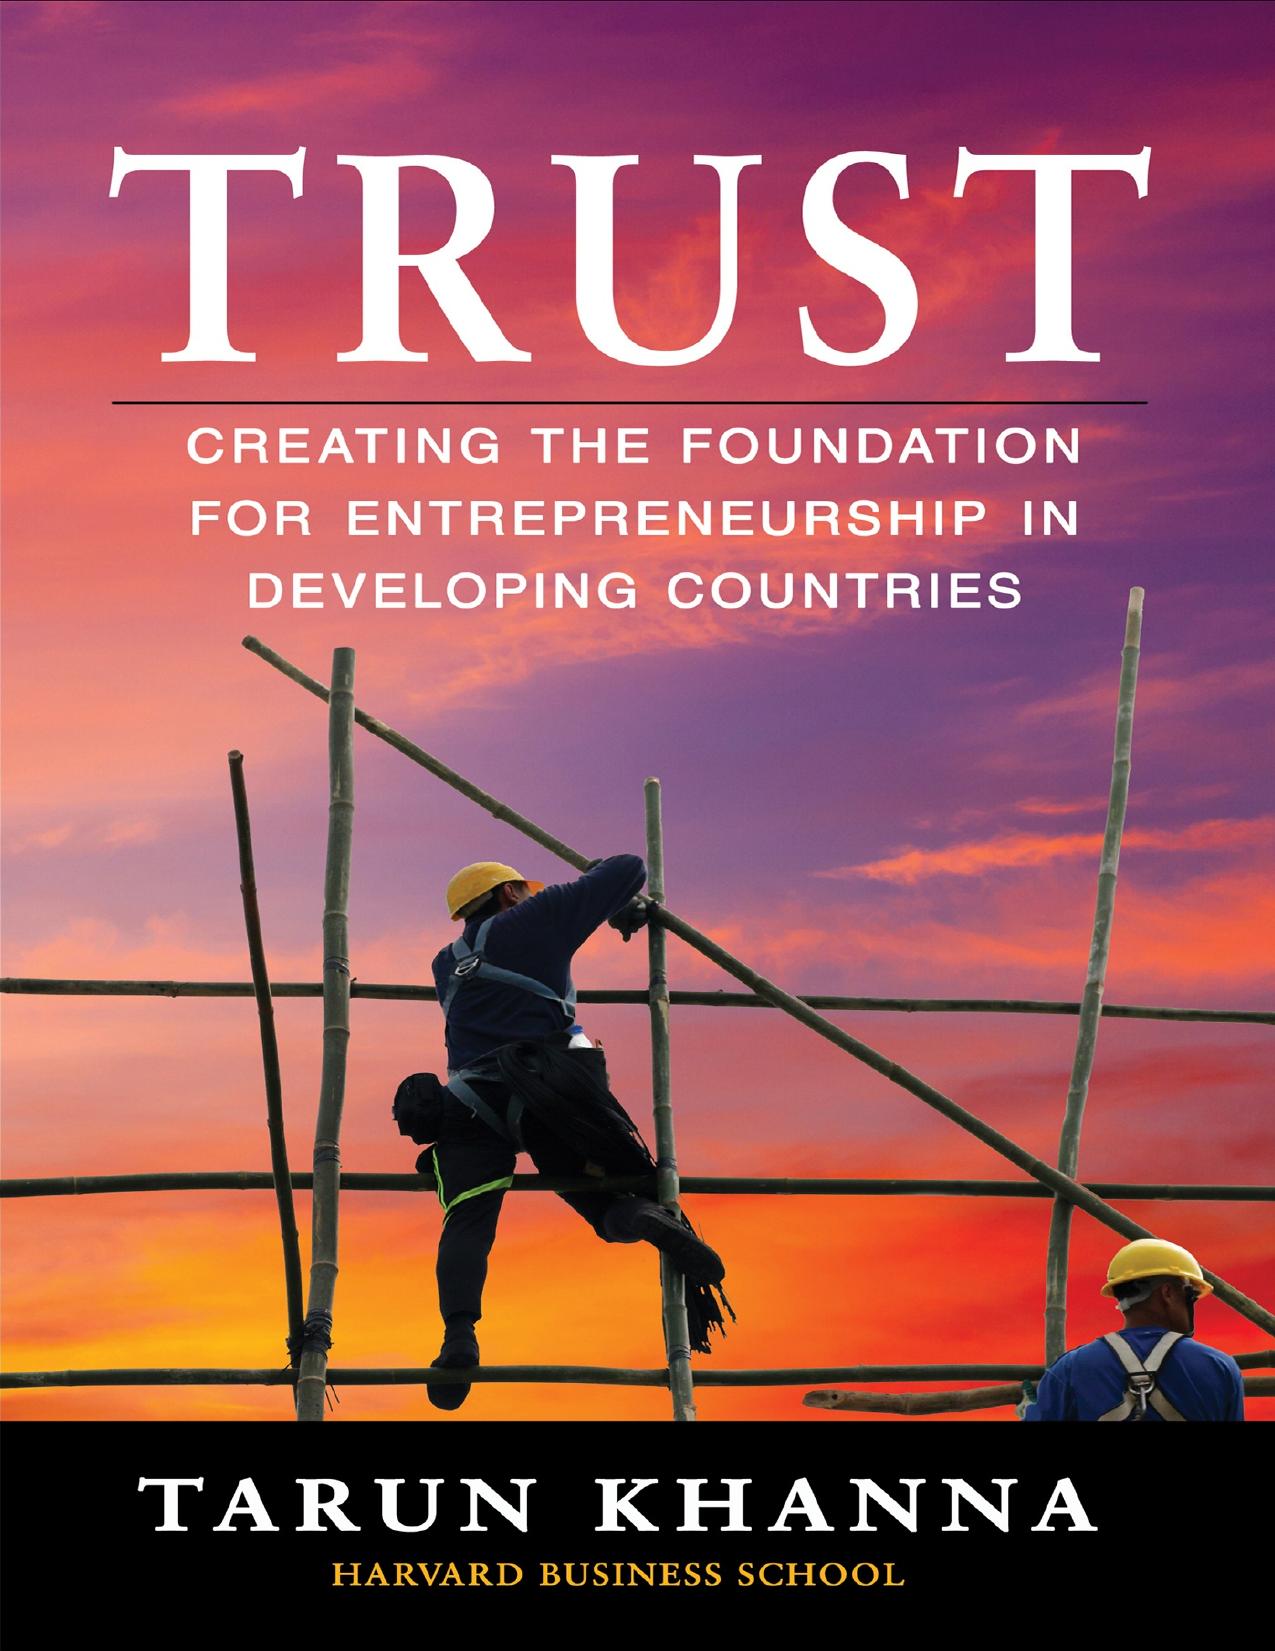 Trust: Creating the Foundation for Entrepreneurship in Developing Countries - PDFDrive.com